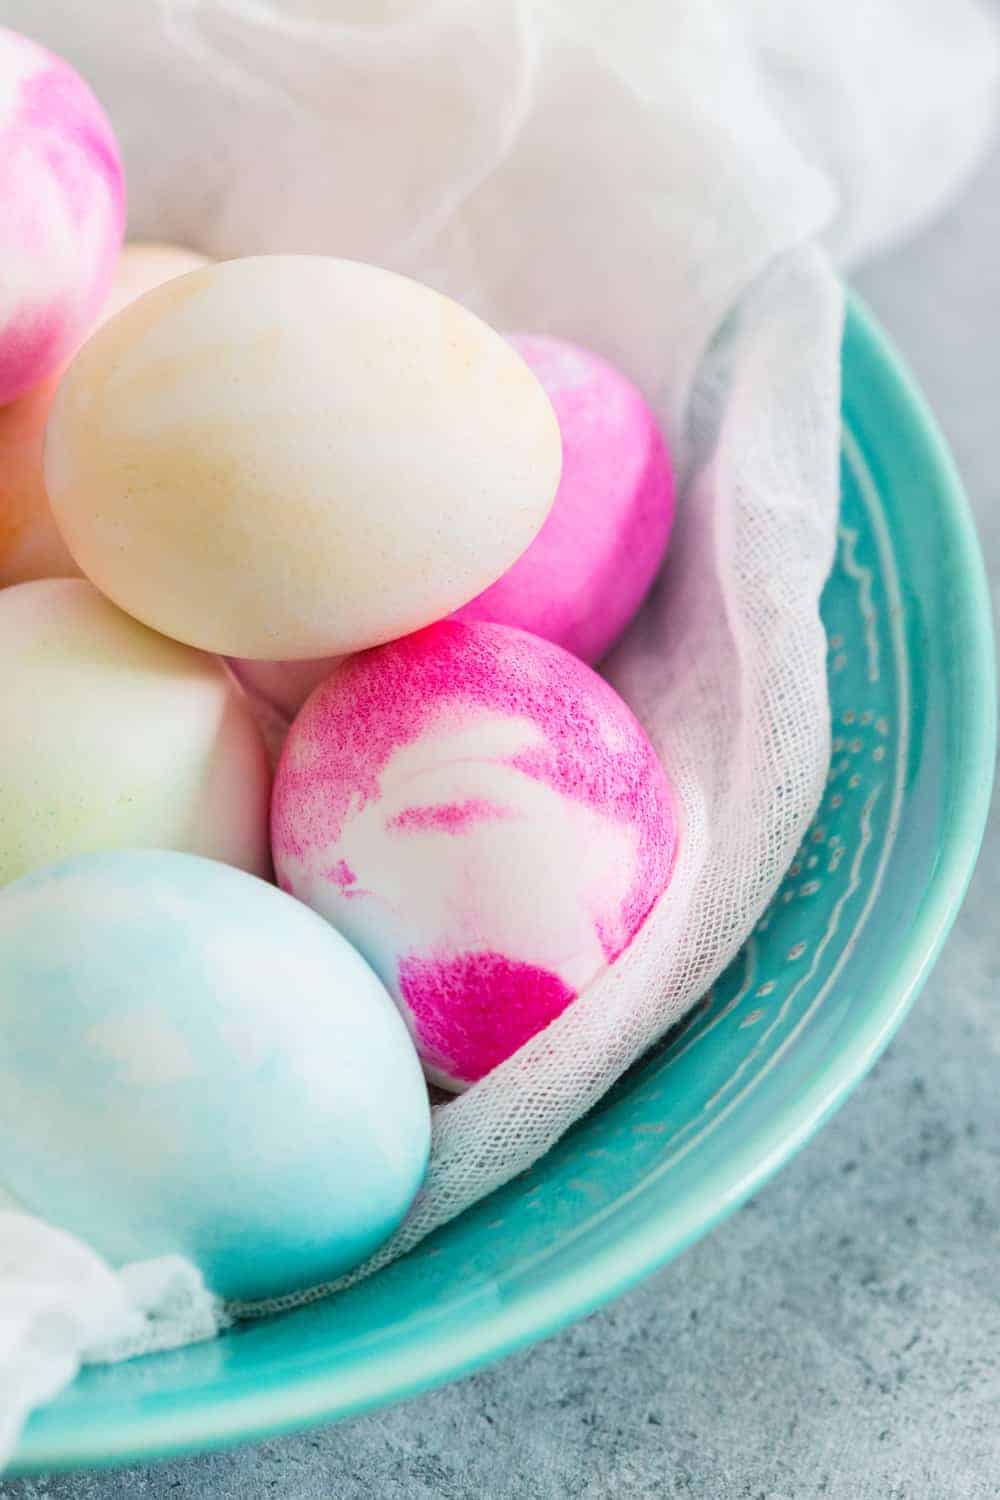 These Whipped Cream Dyed Easter Eggs couldn't be easier, or more fun!